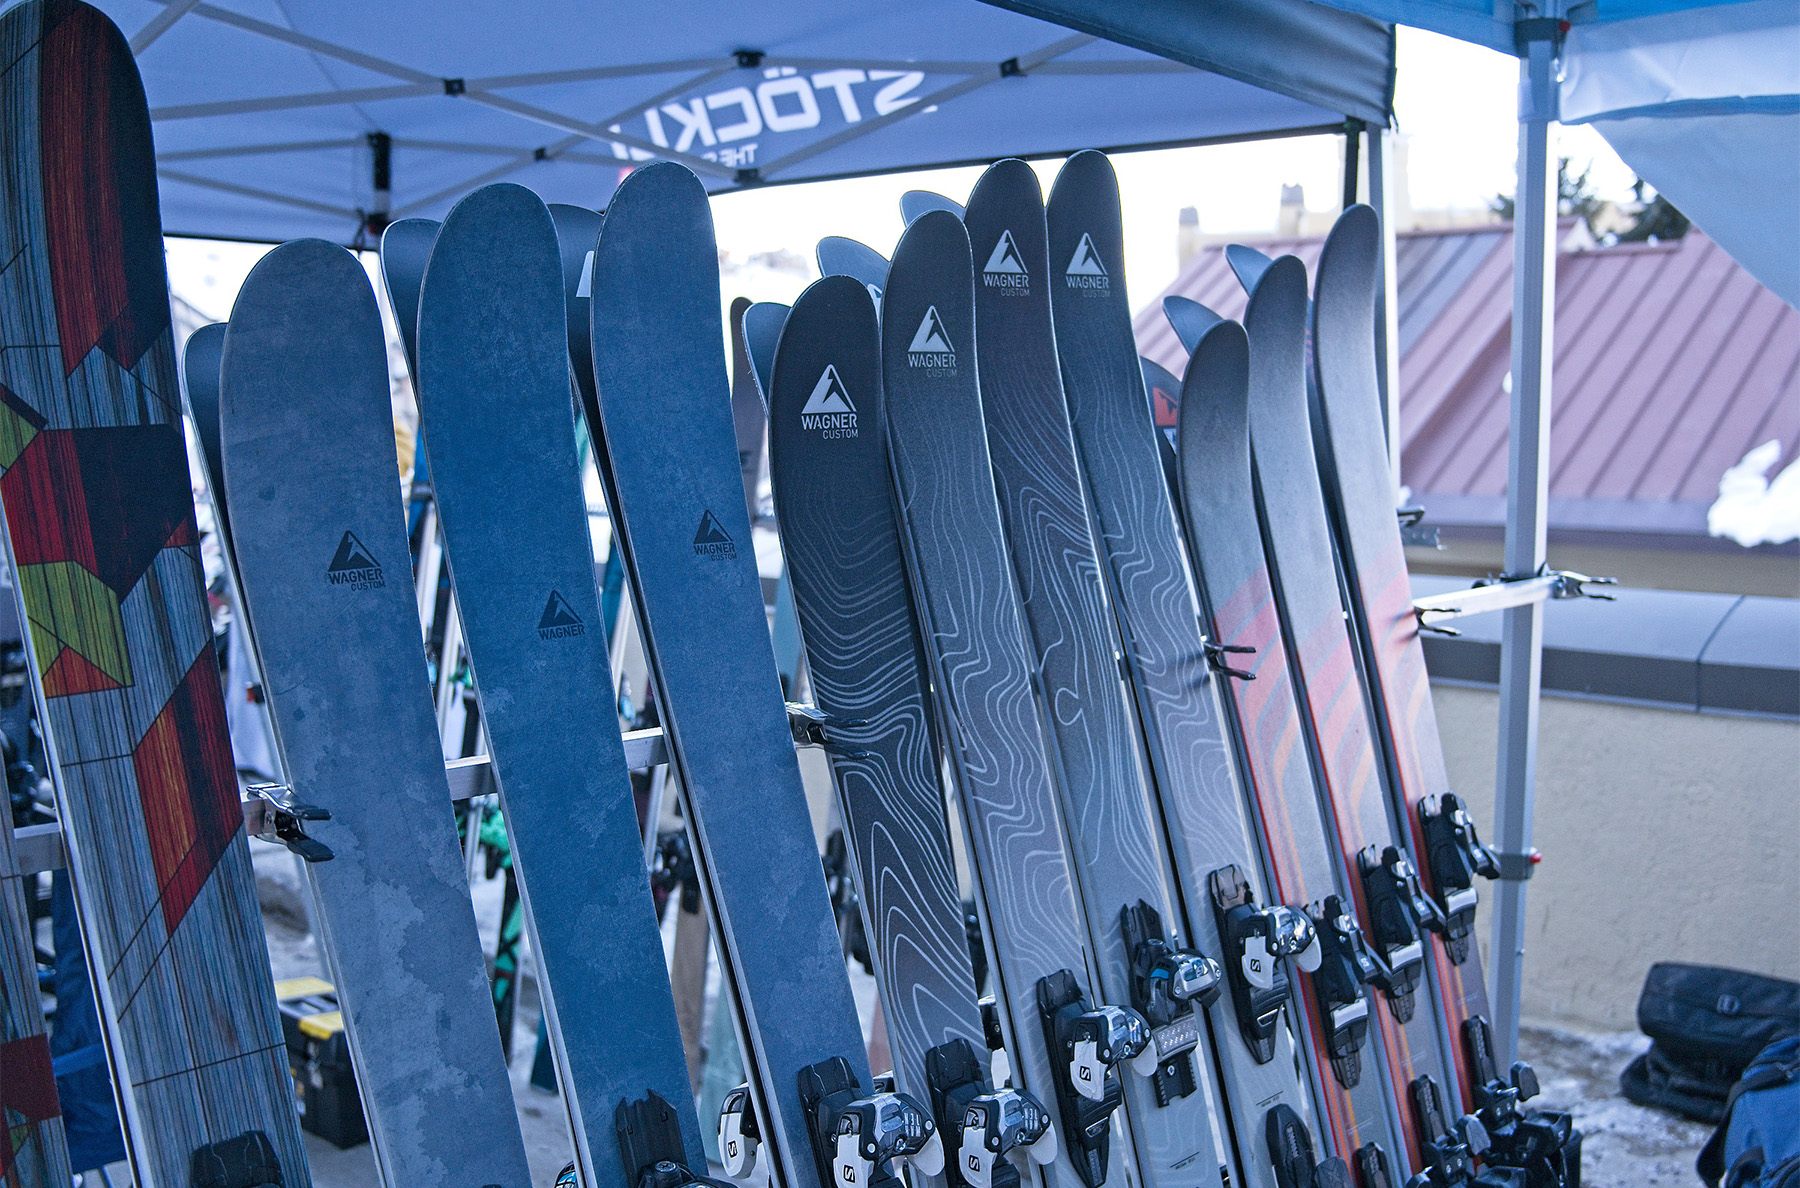 Wagner factory skis